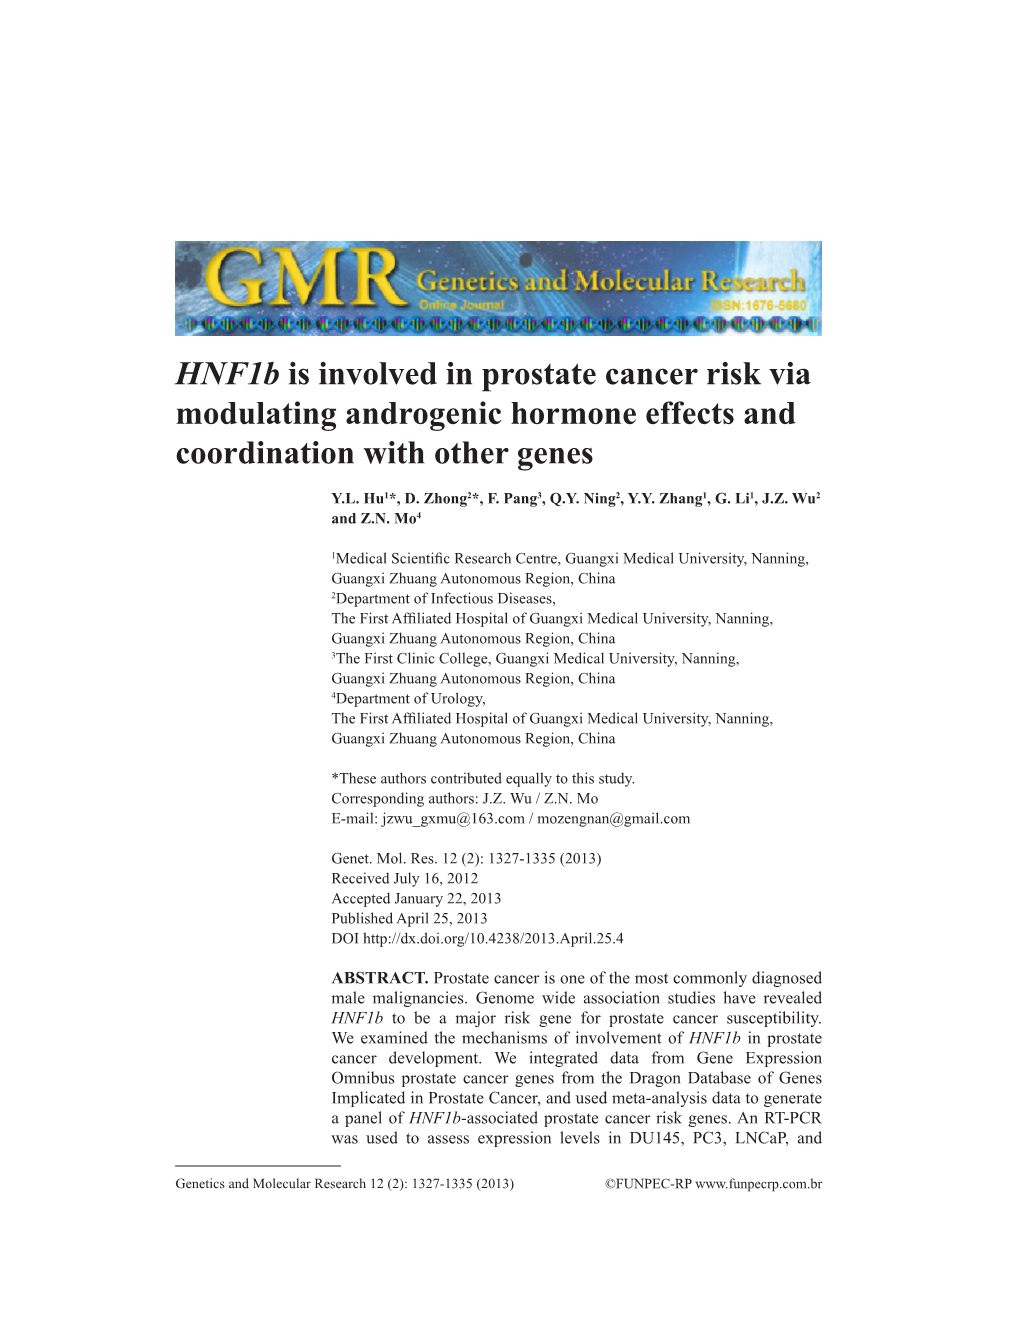 Hnf1b Is Involved in Prostate Cancer Risk Via Modulating Androgenic Hormone Effects and Coordination with Other Genes